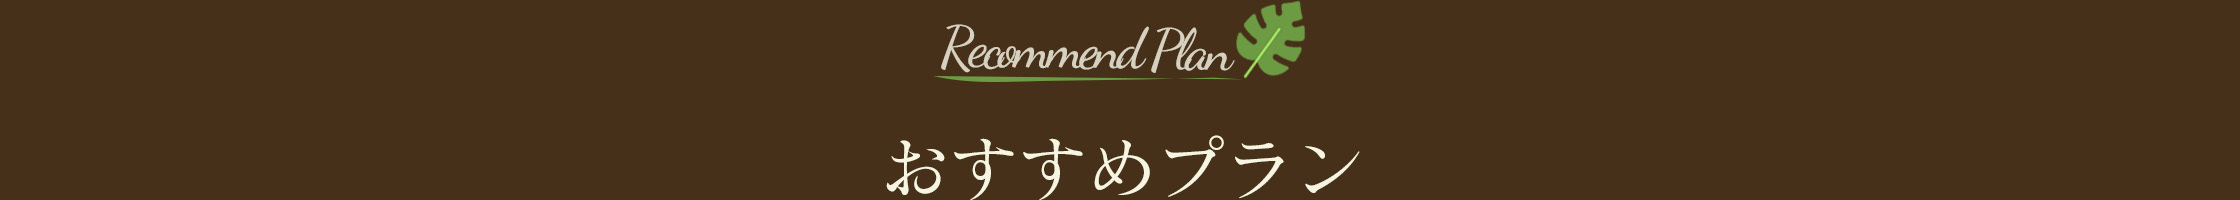 recommended plan banner